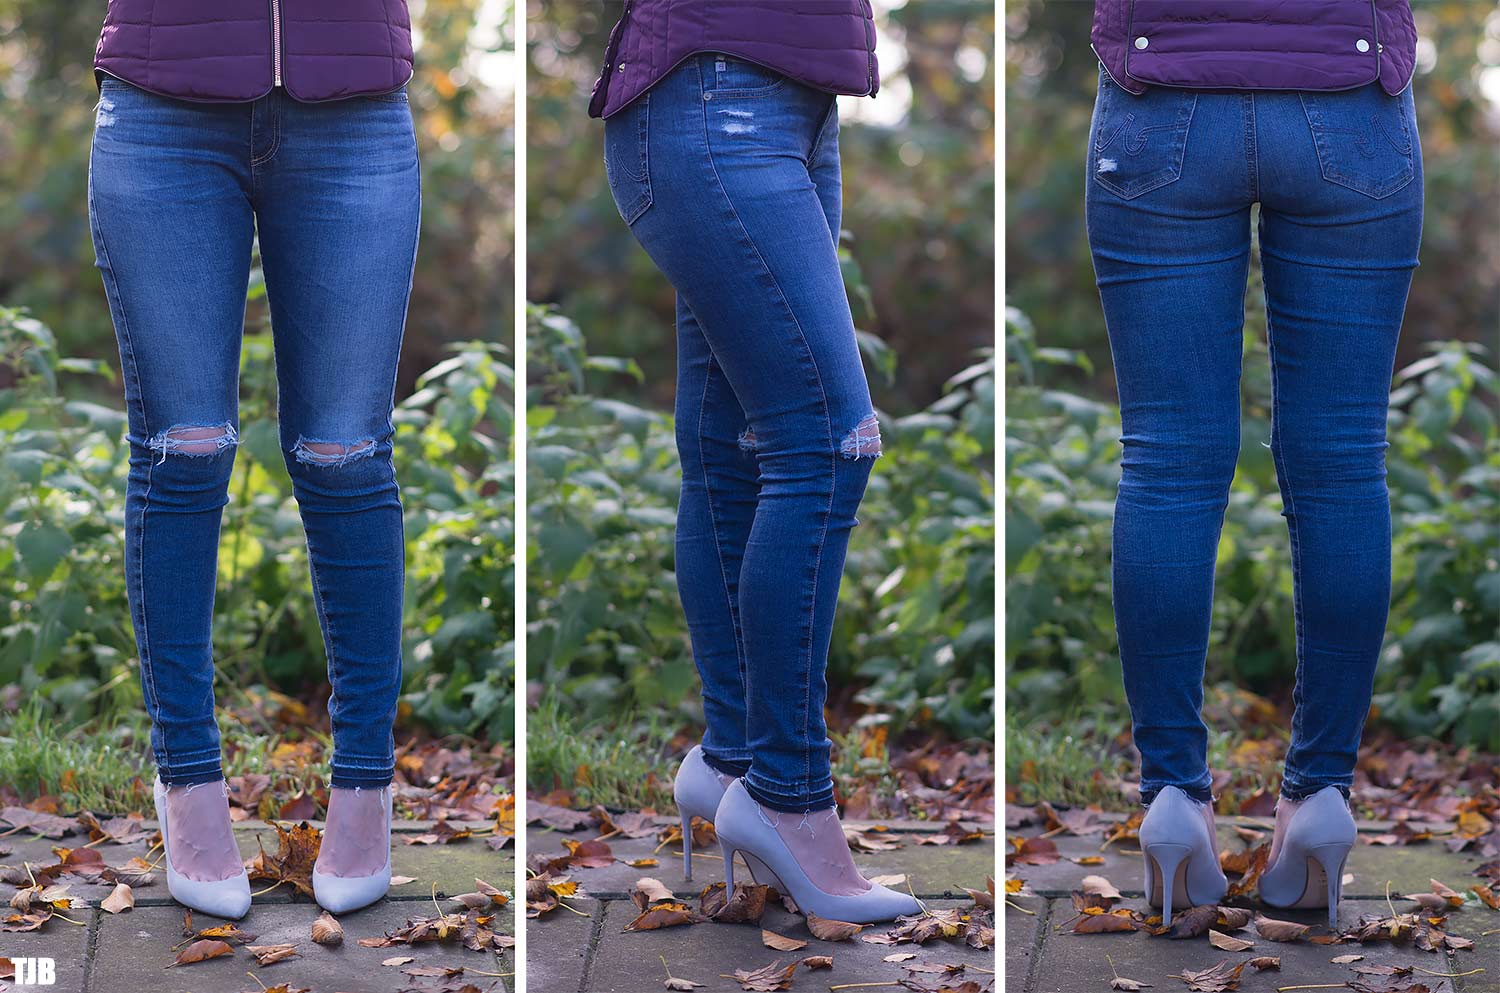 AG's The Legging Jeans - Our Review of These AG's